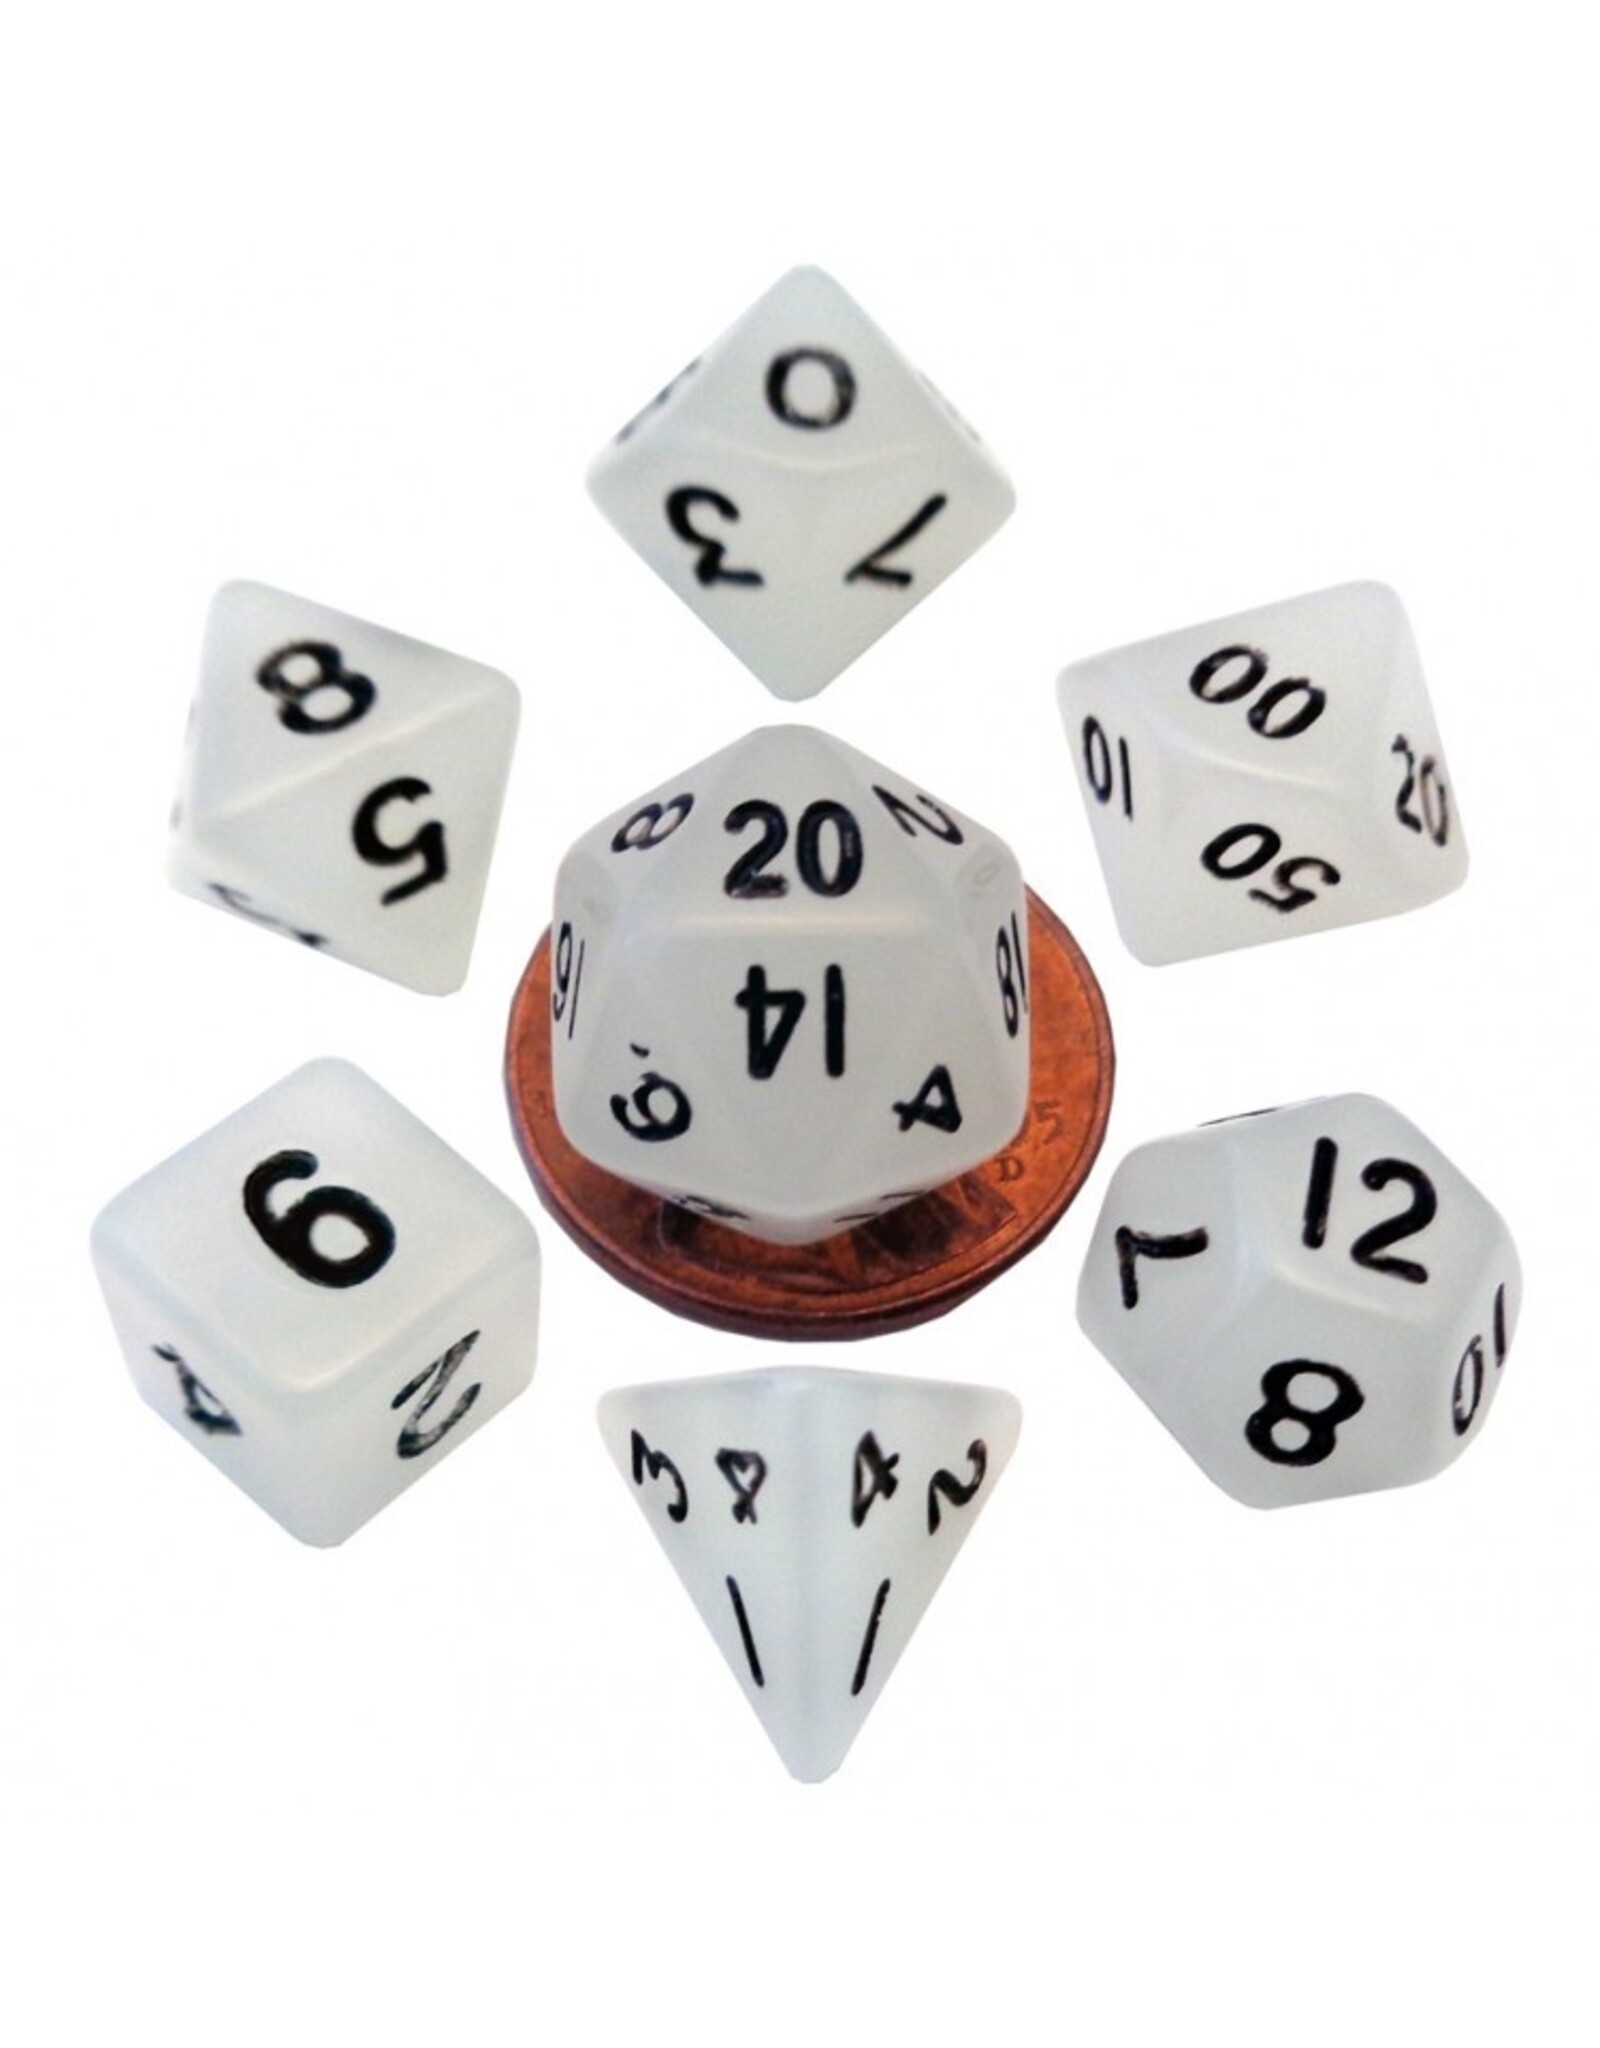 Metallic Dice Games Mini Polyhedral Dice Set: Glow Clear with Black Numbers